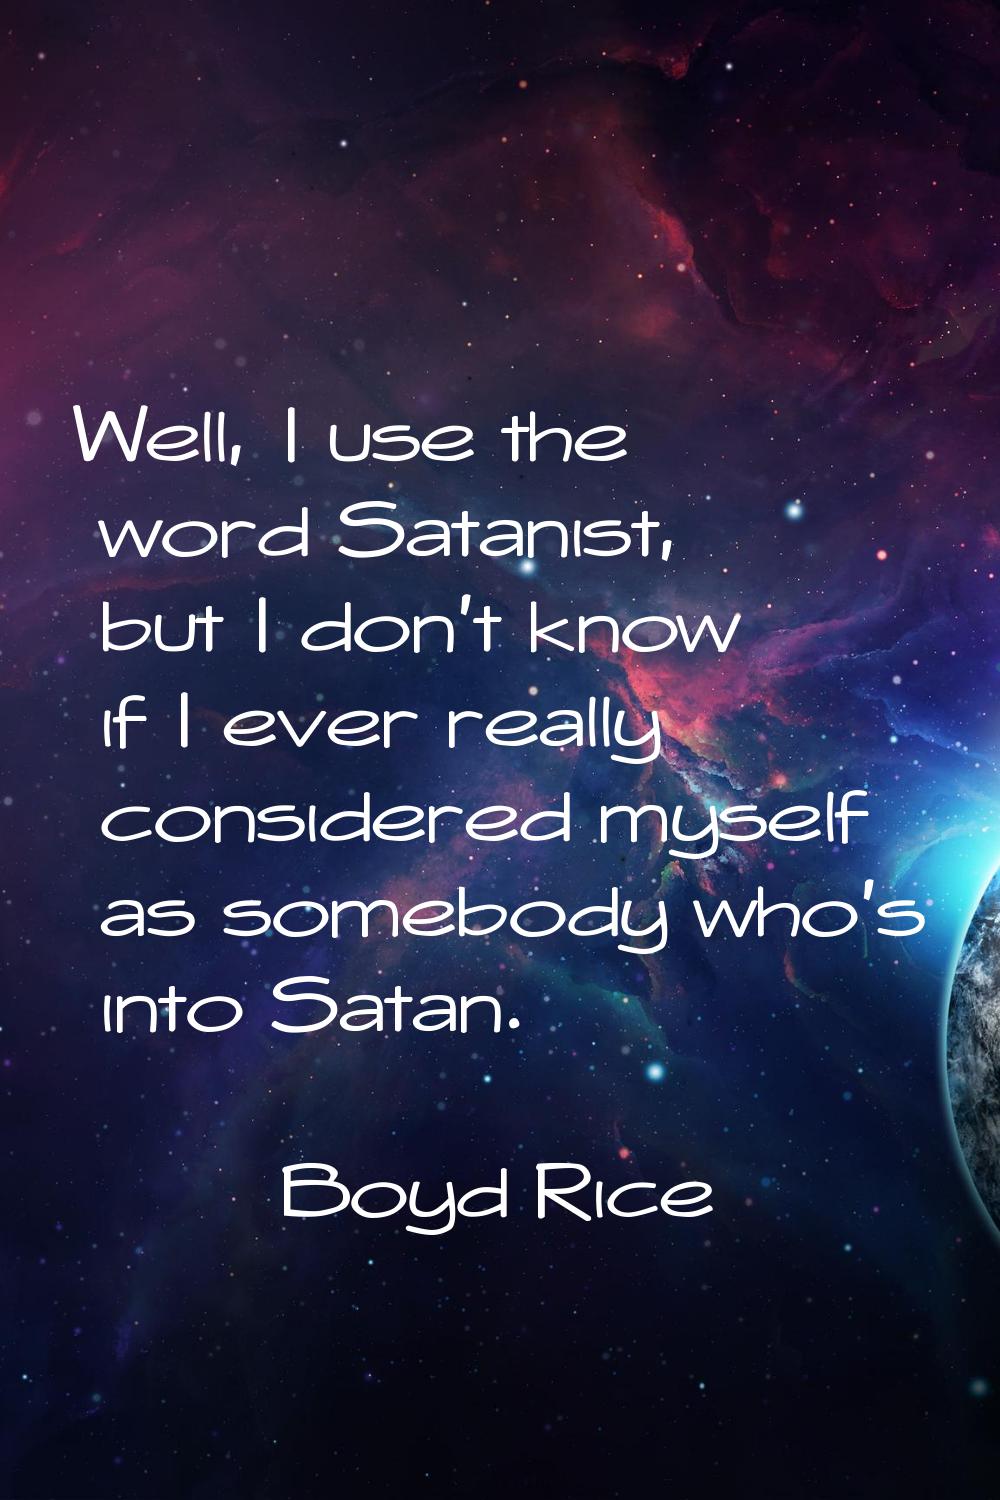 Well, I use the word Satanist, but I don't know if I ever really considered myself as somebody who'